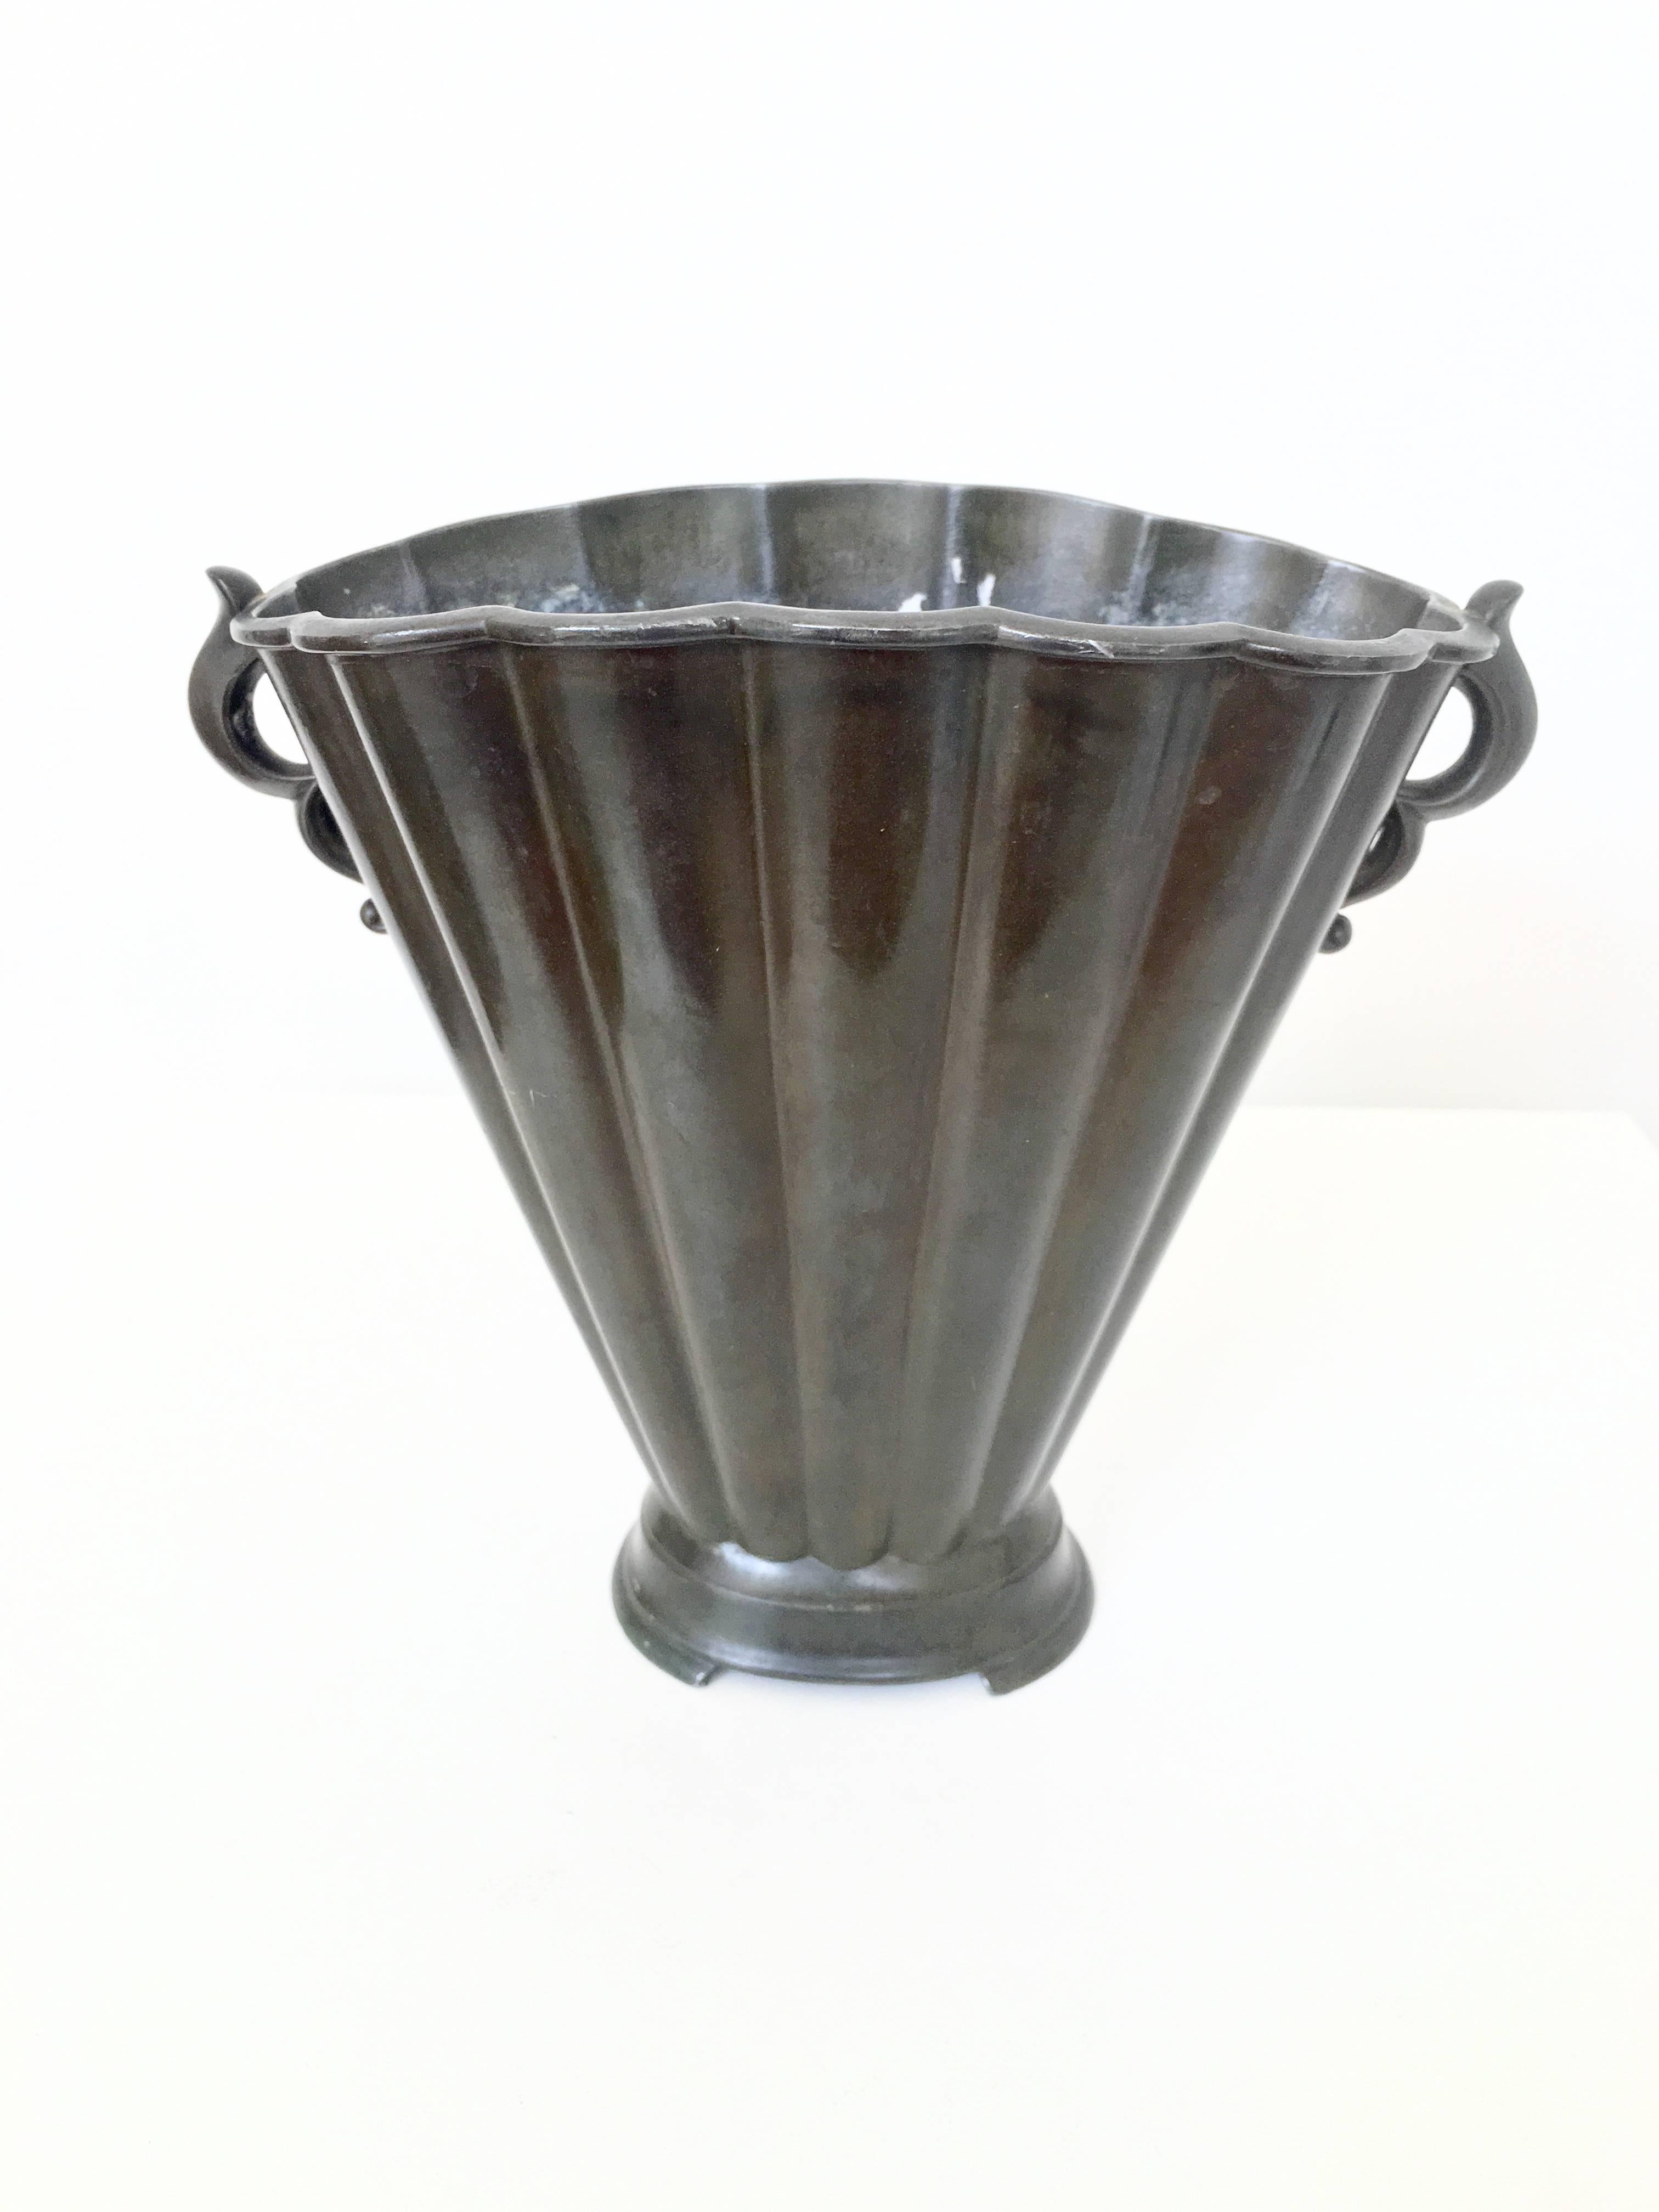 A substantial and gorgeous Disko metal vase by Just Andersen. The fluted vase has beautiful details including a scalloped edge on the top and pair of beautifully detailed handles.